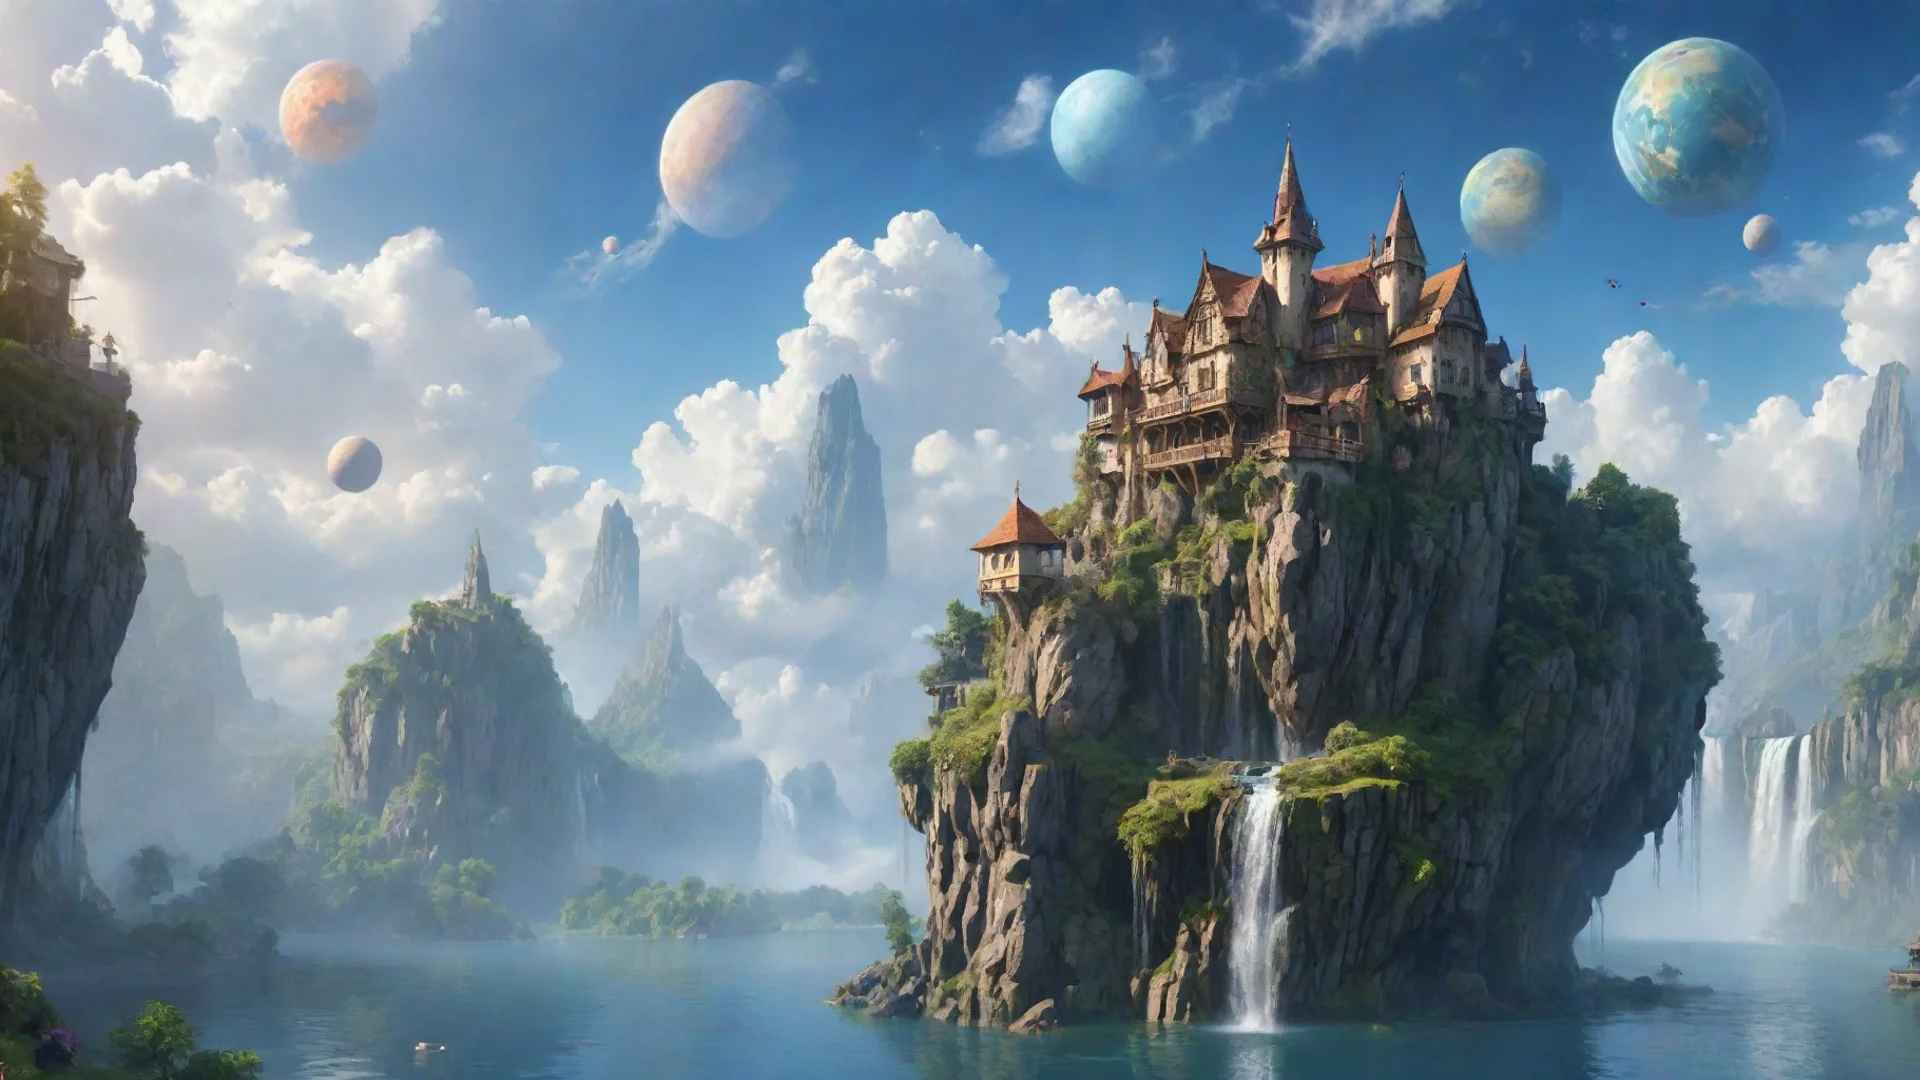 aipeaceful cottage in sky epic floating castle on floating cliffs with waterfalls down beautiful sky with planets wide